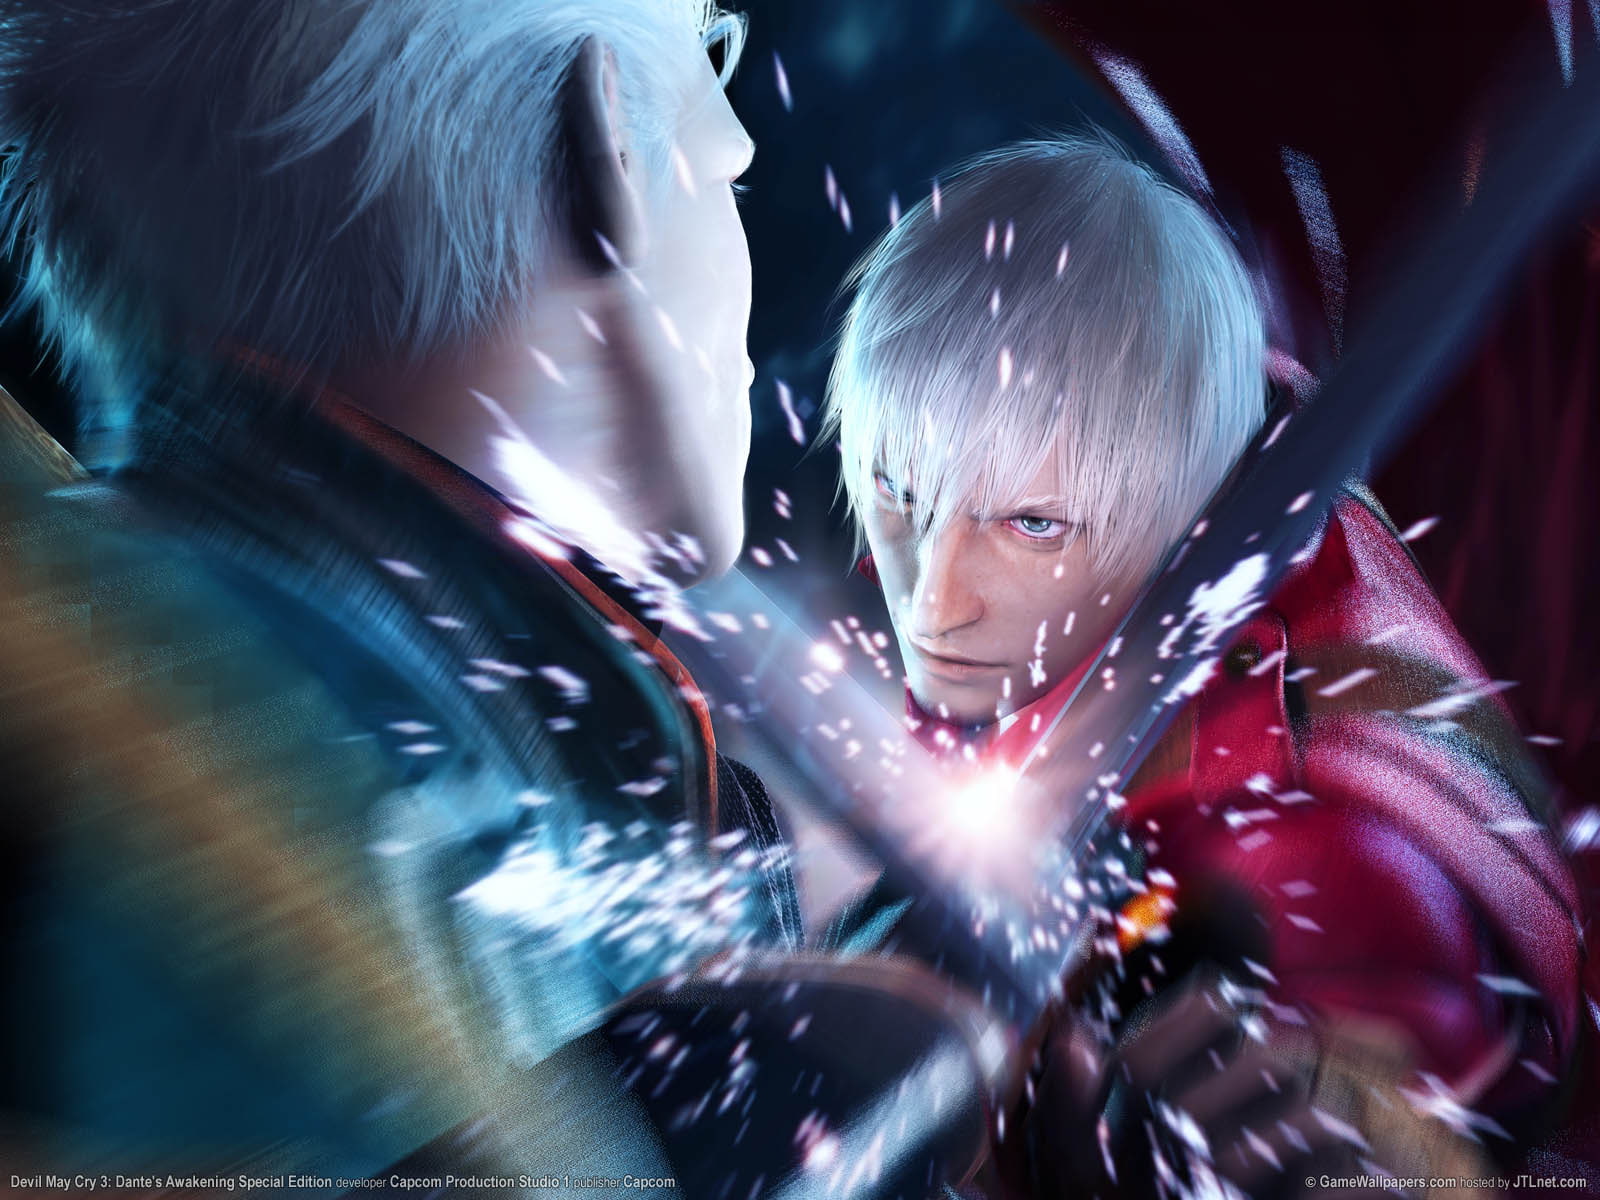 Devil May Cry, Dante (Devil May Cry), Vergil (Devil May Cry)